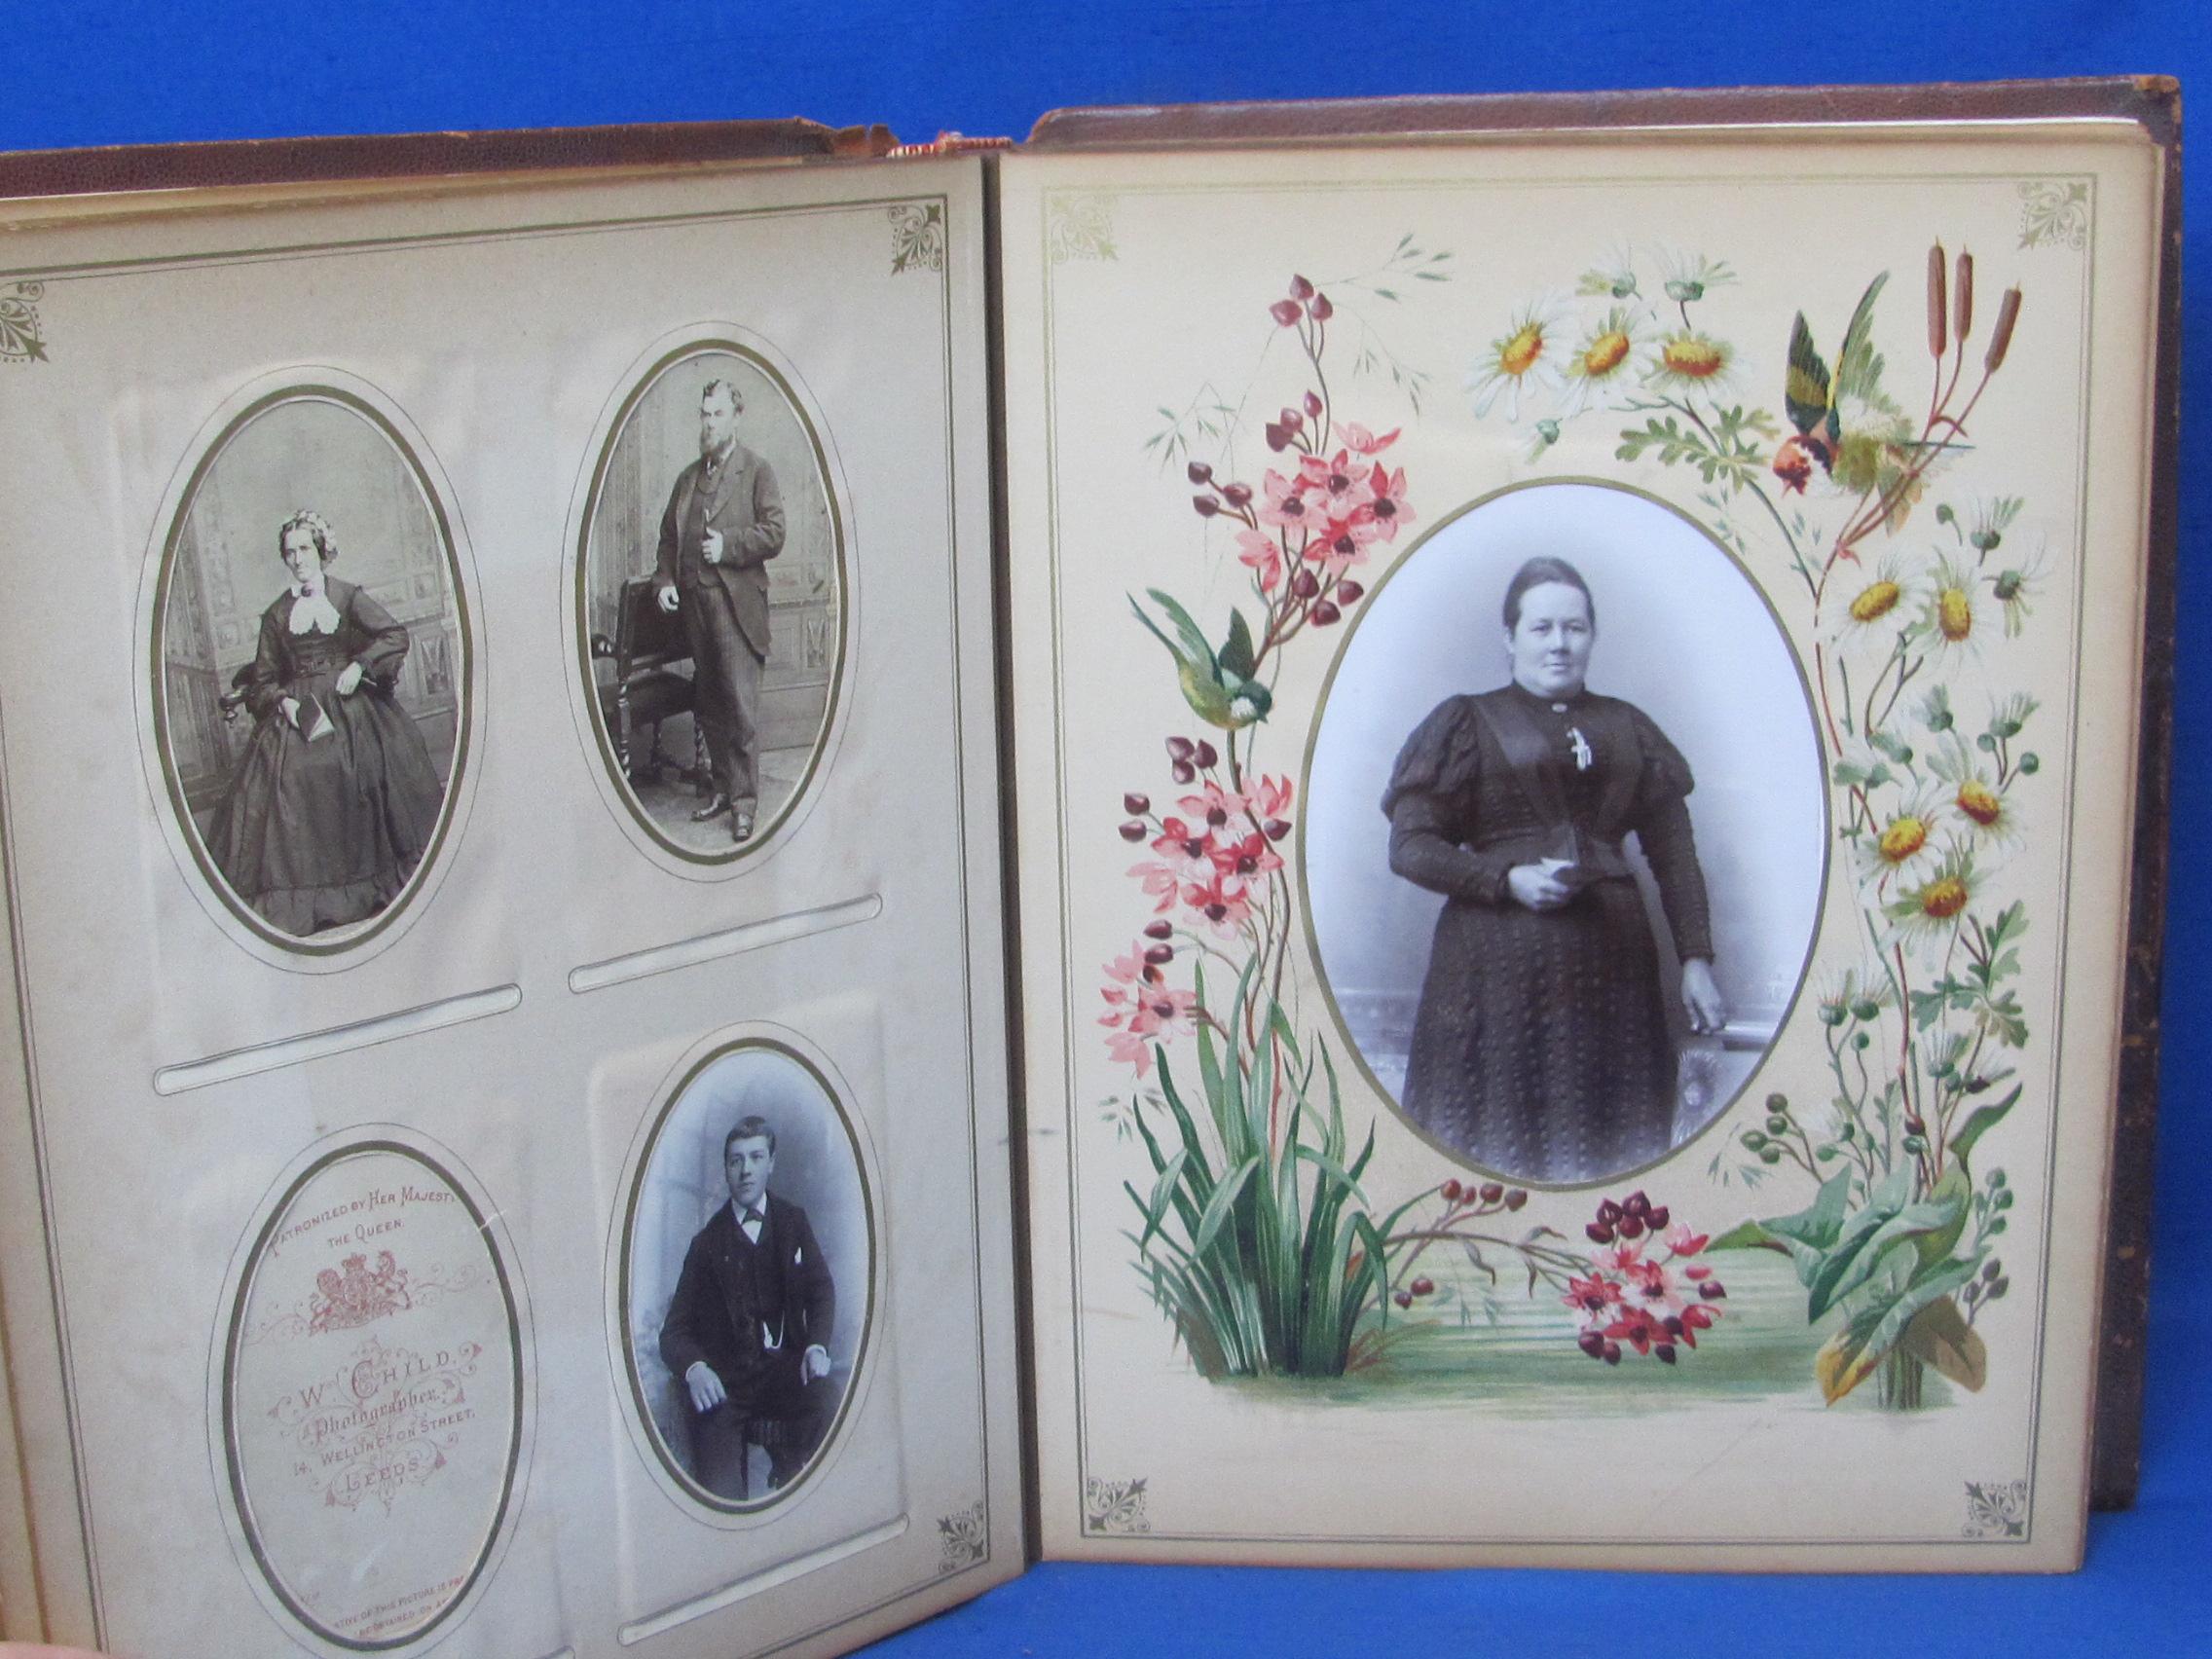 Antique Leather Bound Photograph Album – Full of Pictures - 1st Optical Illusion Skull/2 Little girl